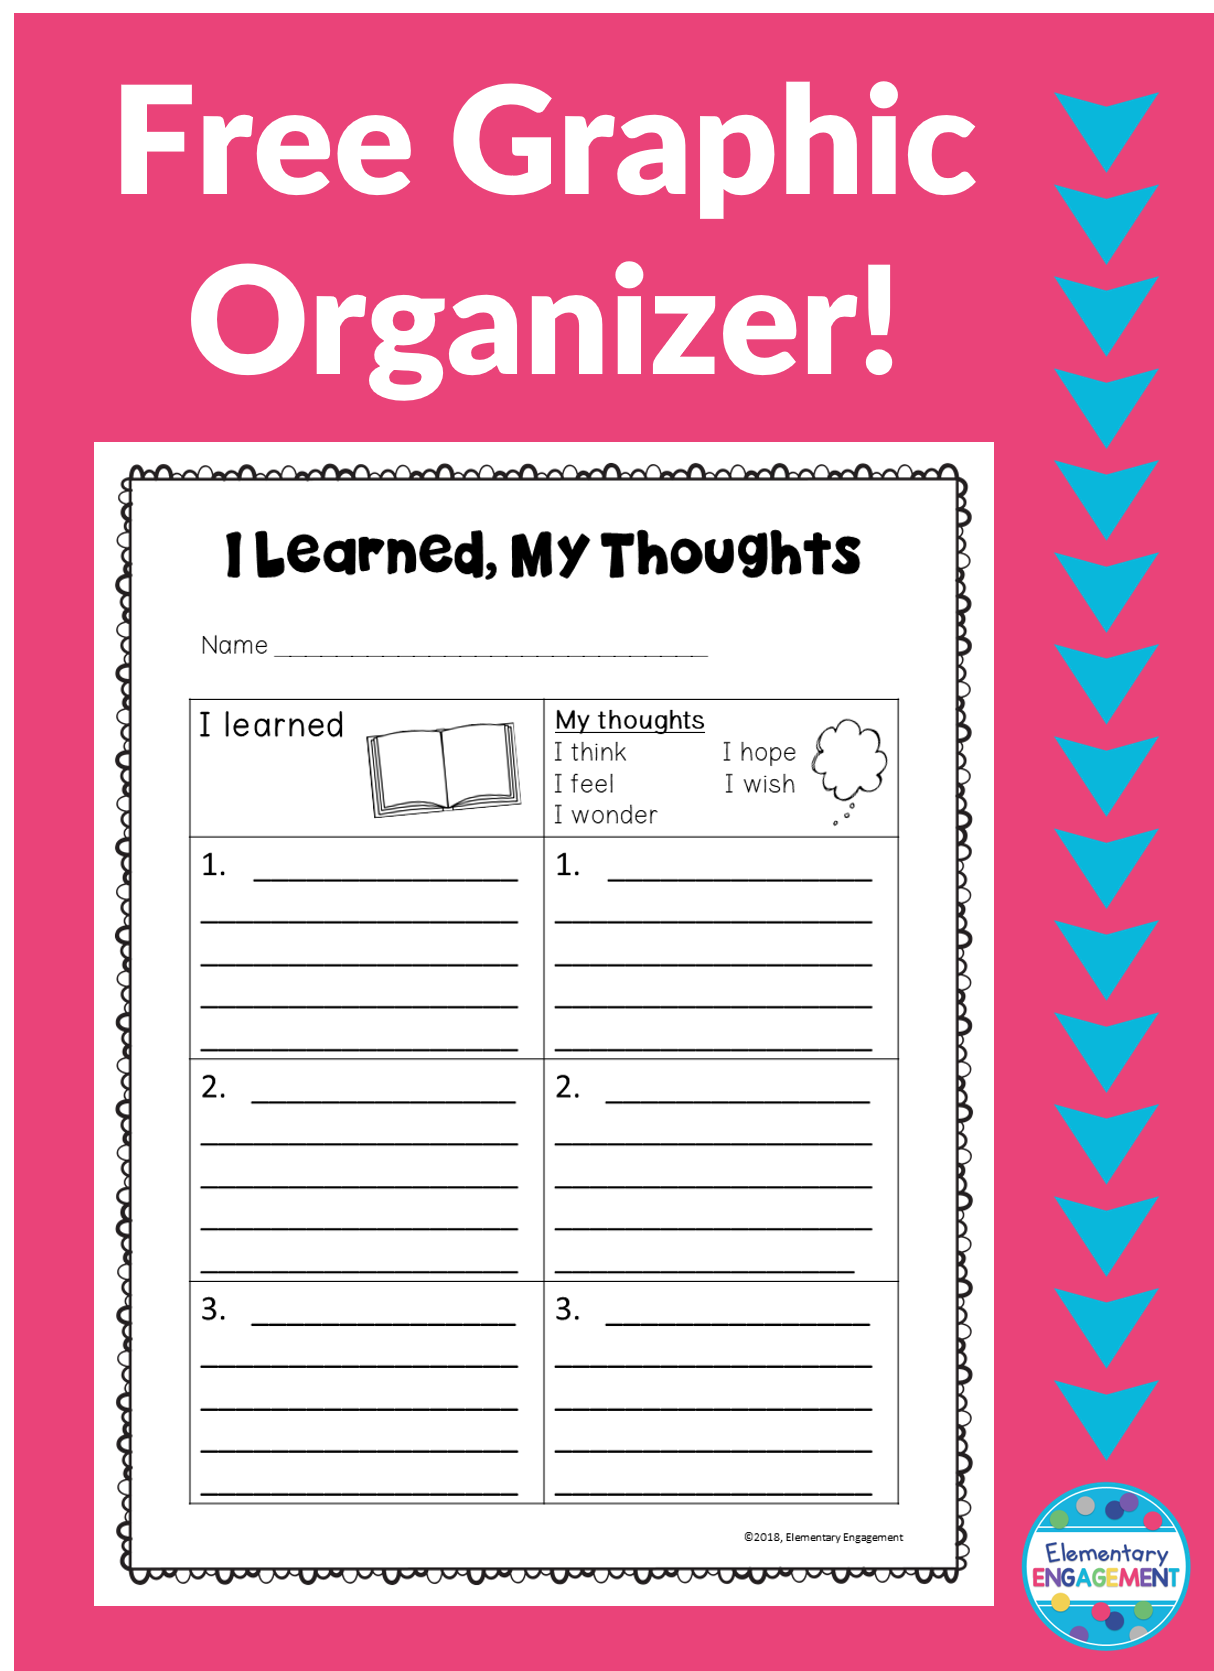 This graphic organizer is a great way for students to share what they learned as well as what they think about their reading.  Bonus: It's free!